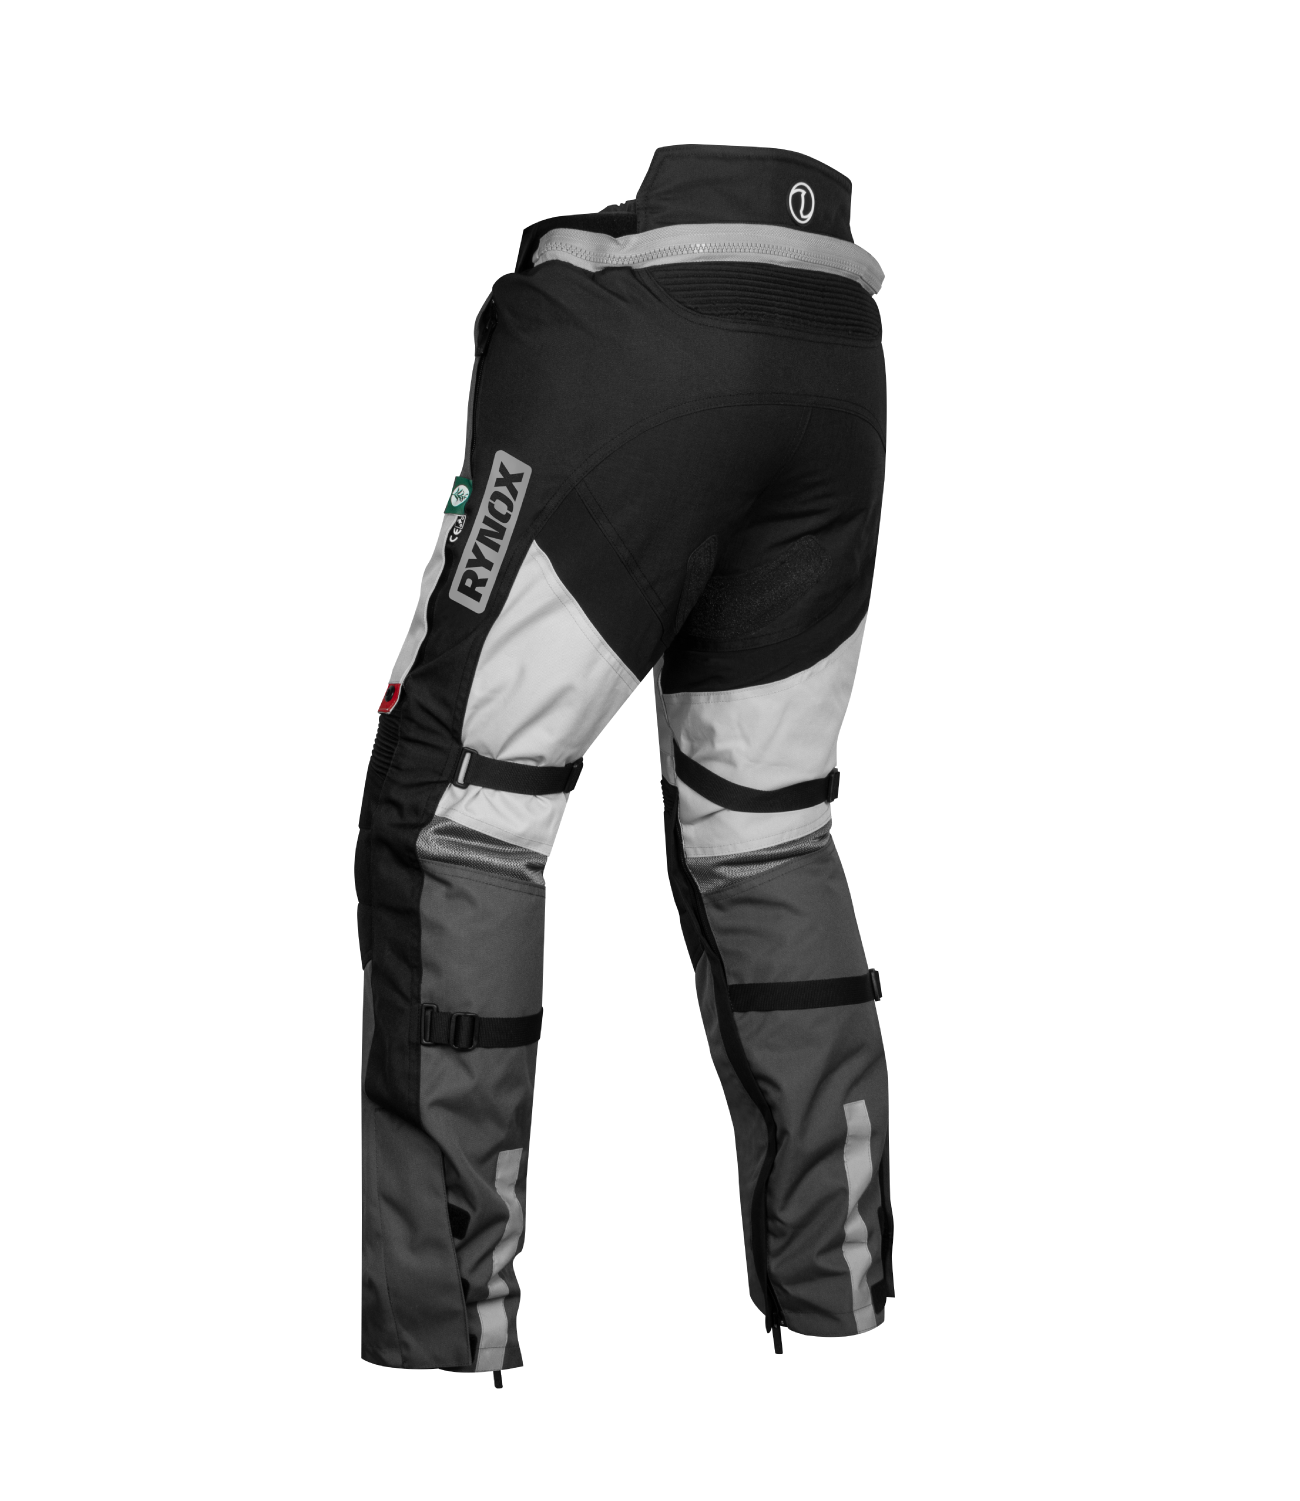 Riding Pants vs Knee Guards Which one to buy | Prakash Panchal - YouTube